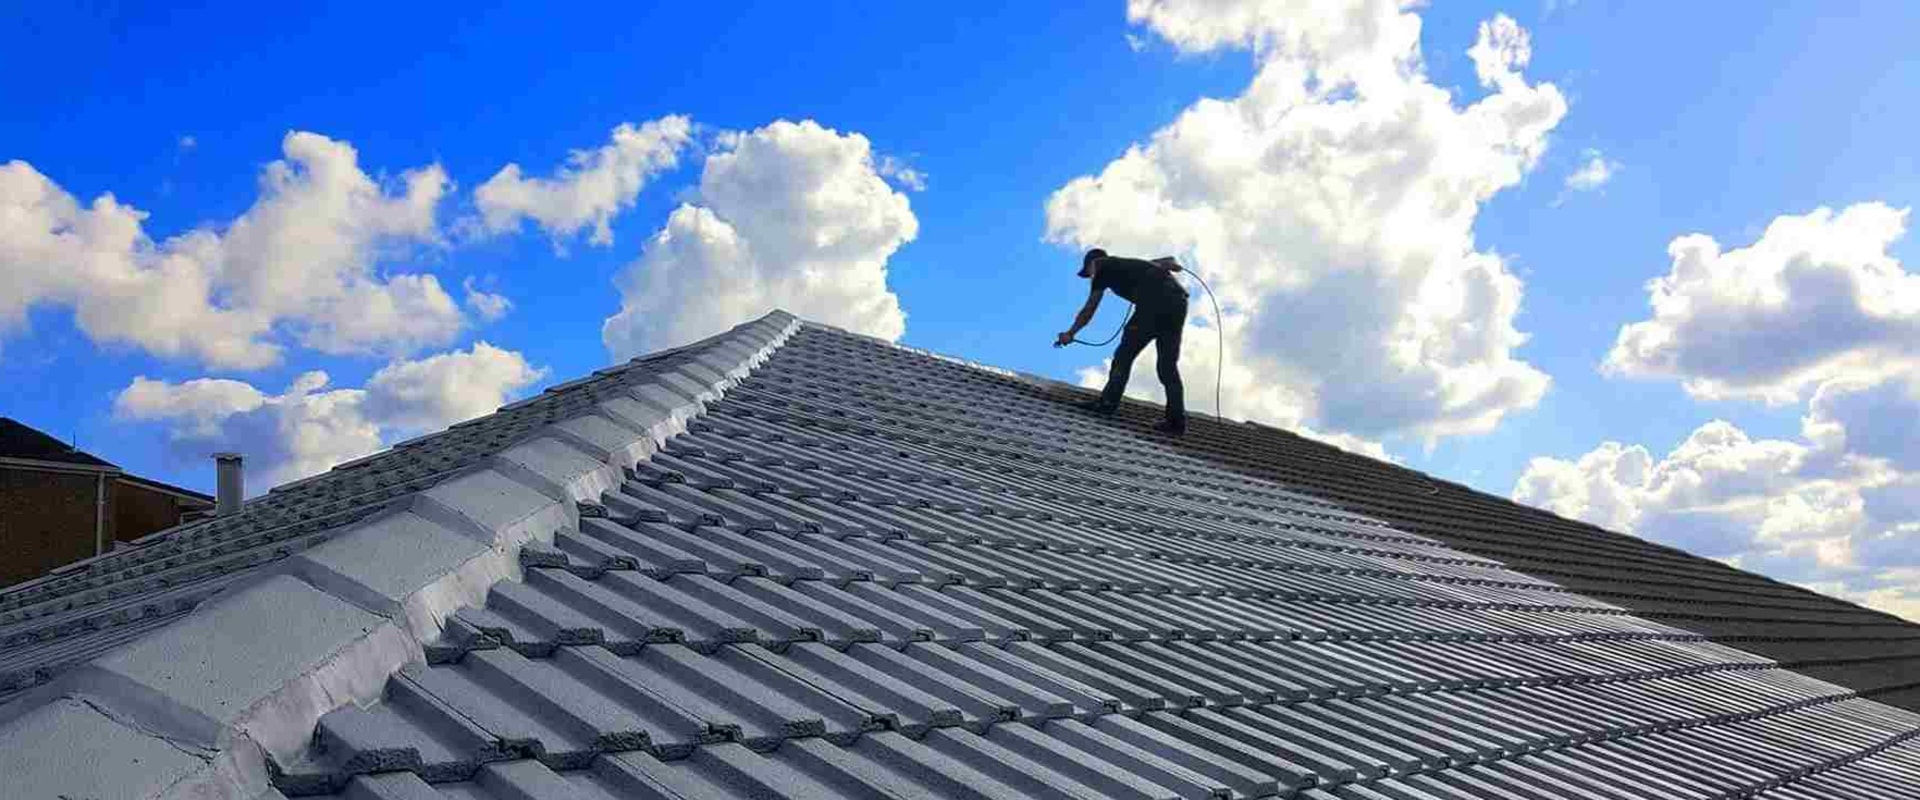 Researching and Comparing Multiple Companies for Your Roofing and Siding Needs